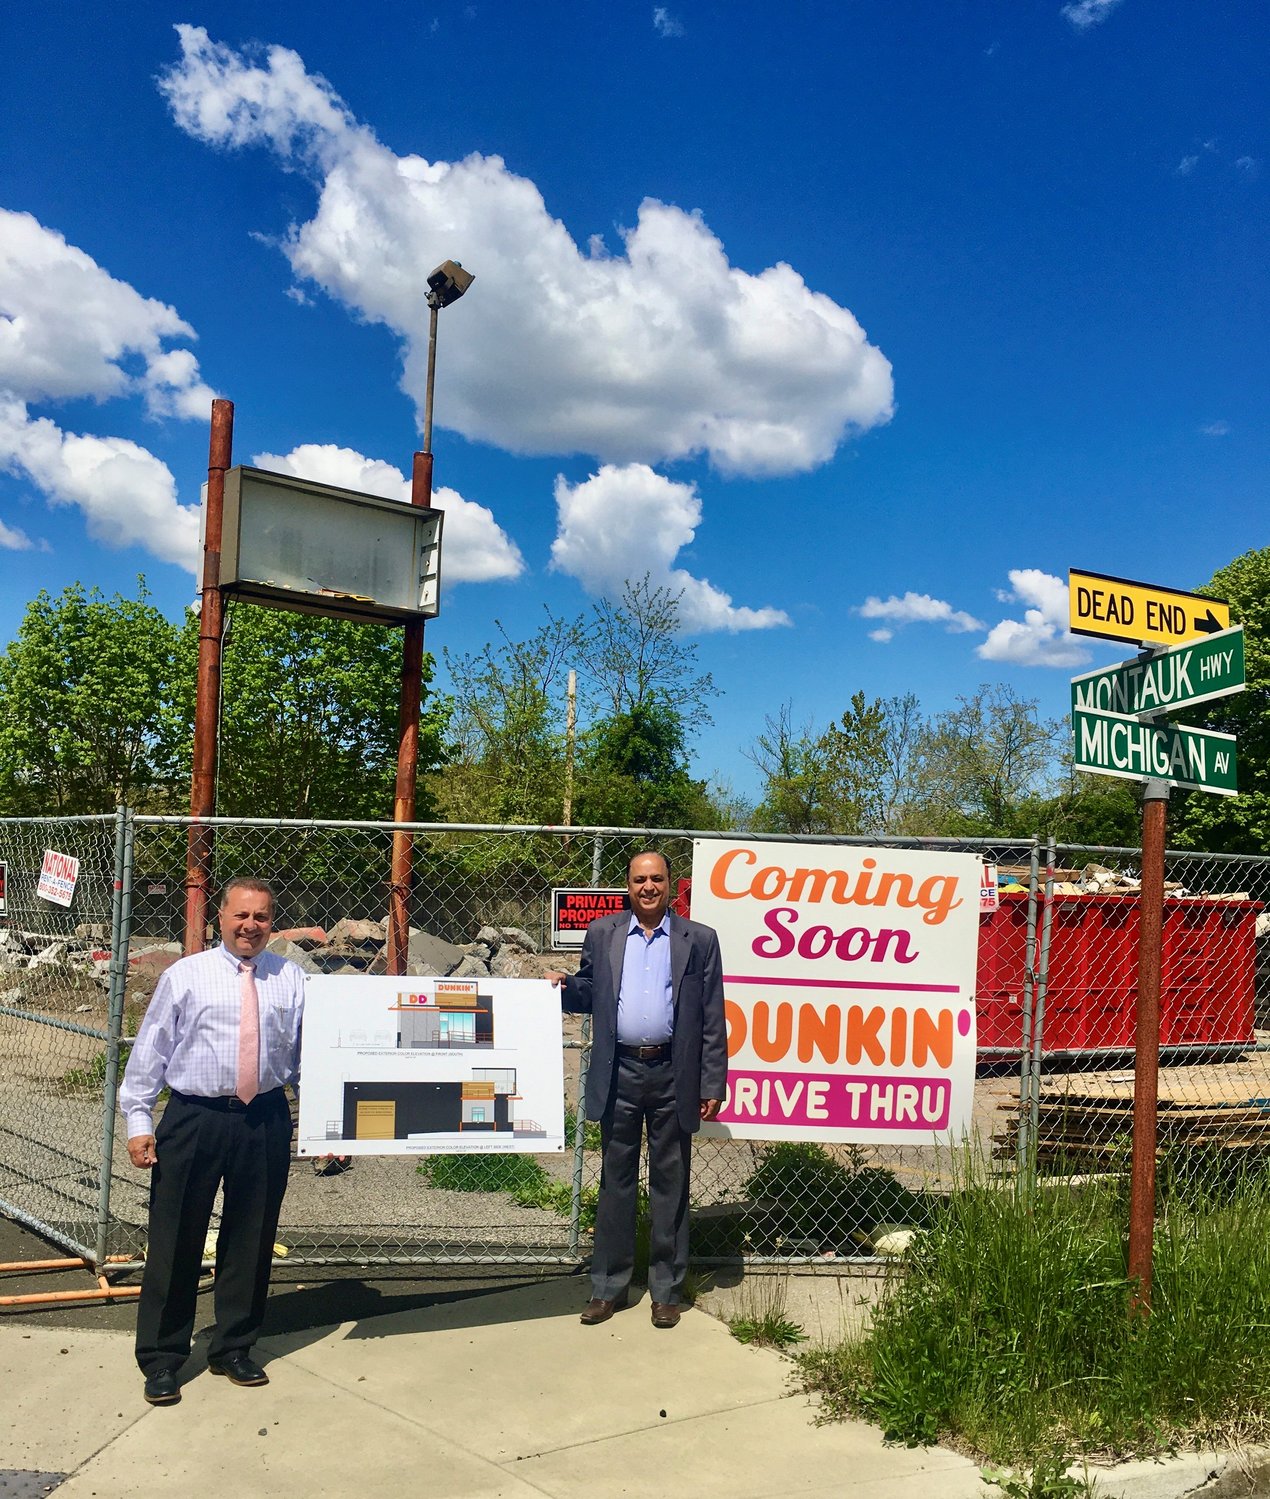 Councilman Michael Loguercio and developer Ben Bathija at the site of the new Dunkin’ drive-thru located at 1669 Montauk Highway in Bellport.